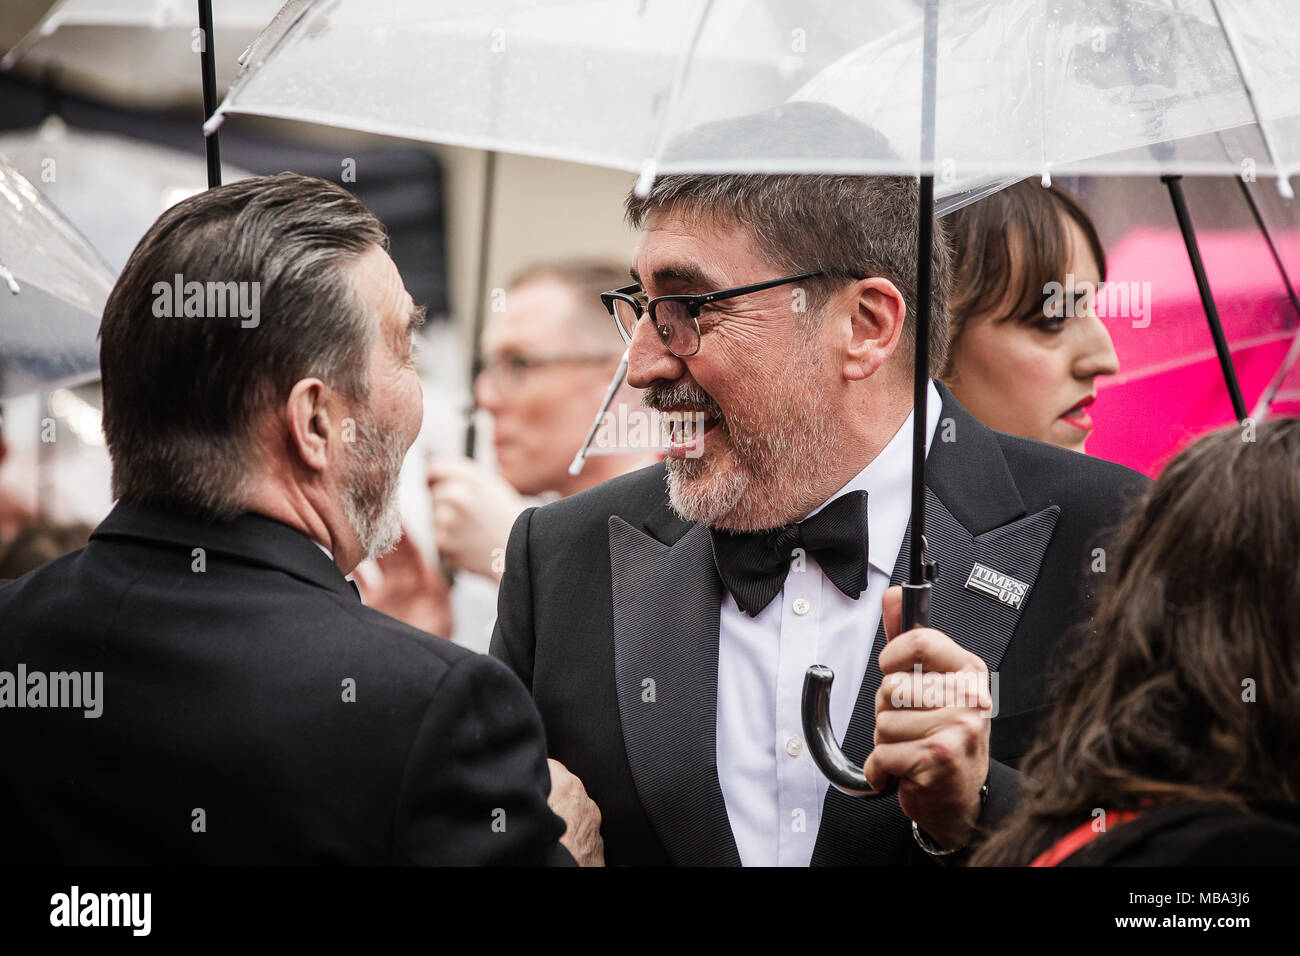 London, UK. 8th April, 2018. British-American actor and voice actor Alfred Molina poses in the rain on the red carpet at the 2018 Olivier Awards held at the Royal Albert Hall. Credit: David Betteridge/Alamy Live News Stock Photo